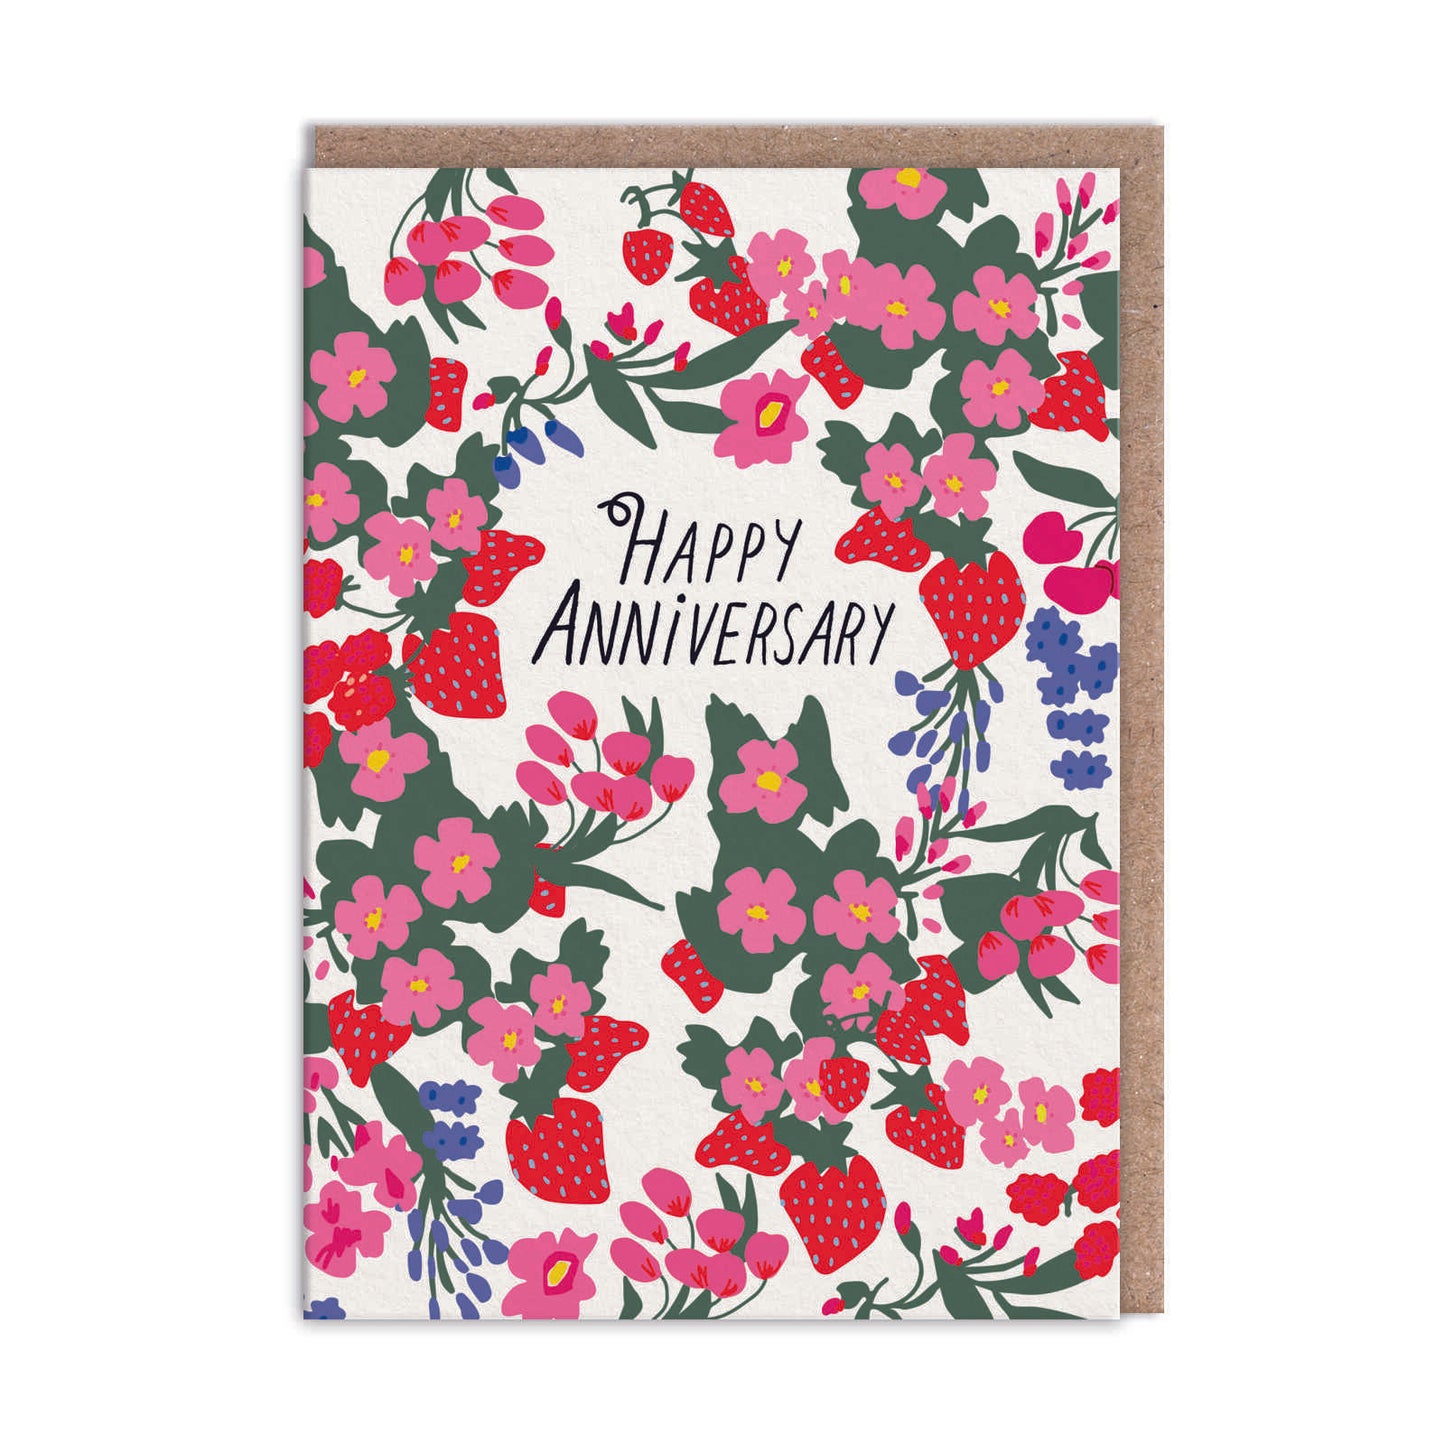 Anniversary card with a flowers and strawberries illustration. Text reads "Happy Anniversary"